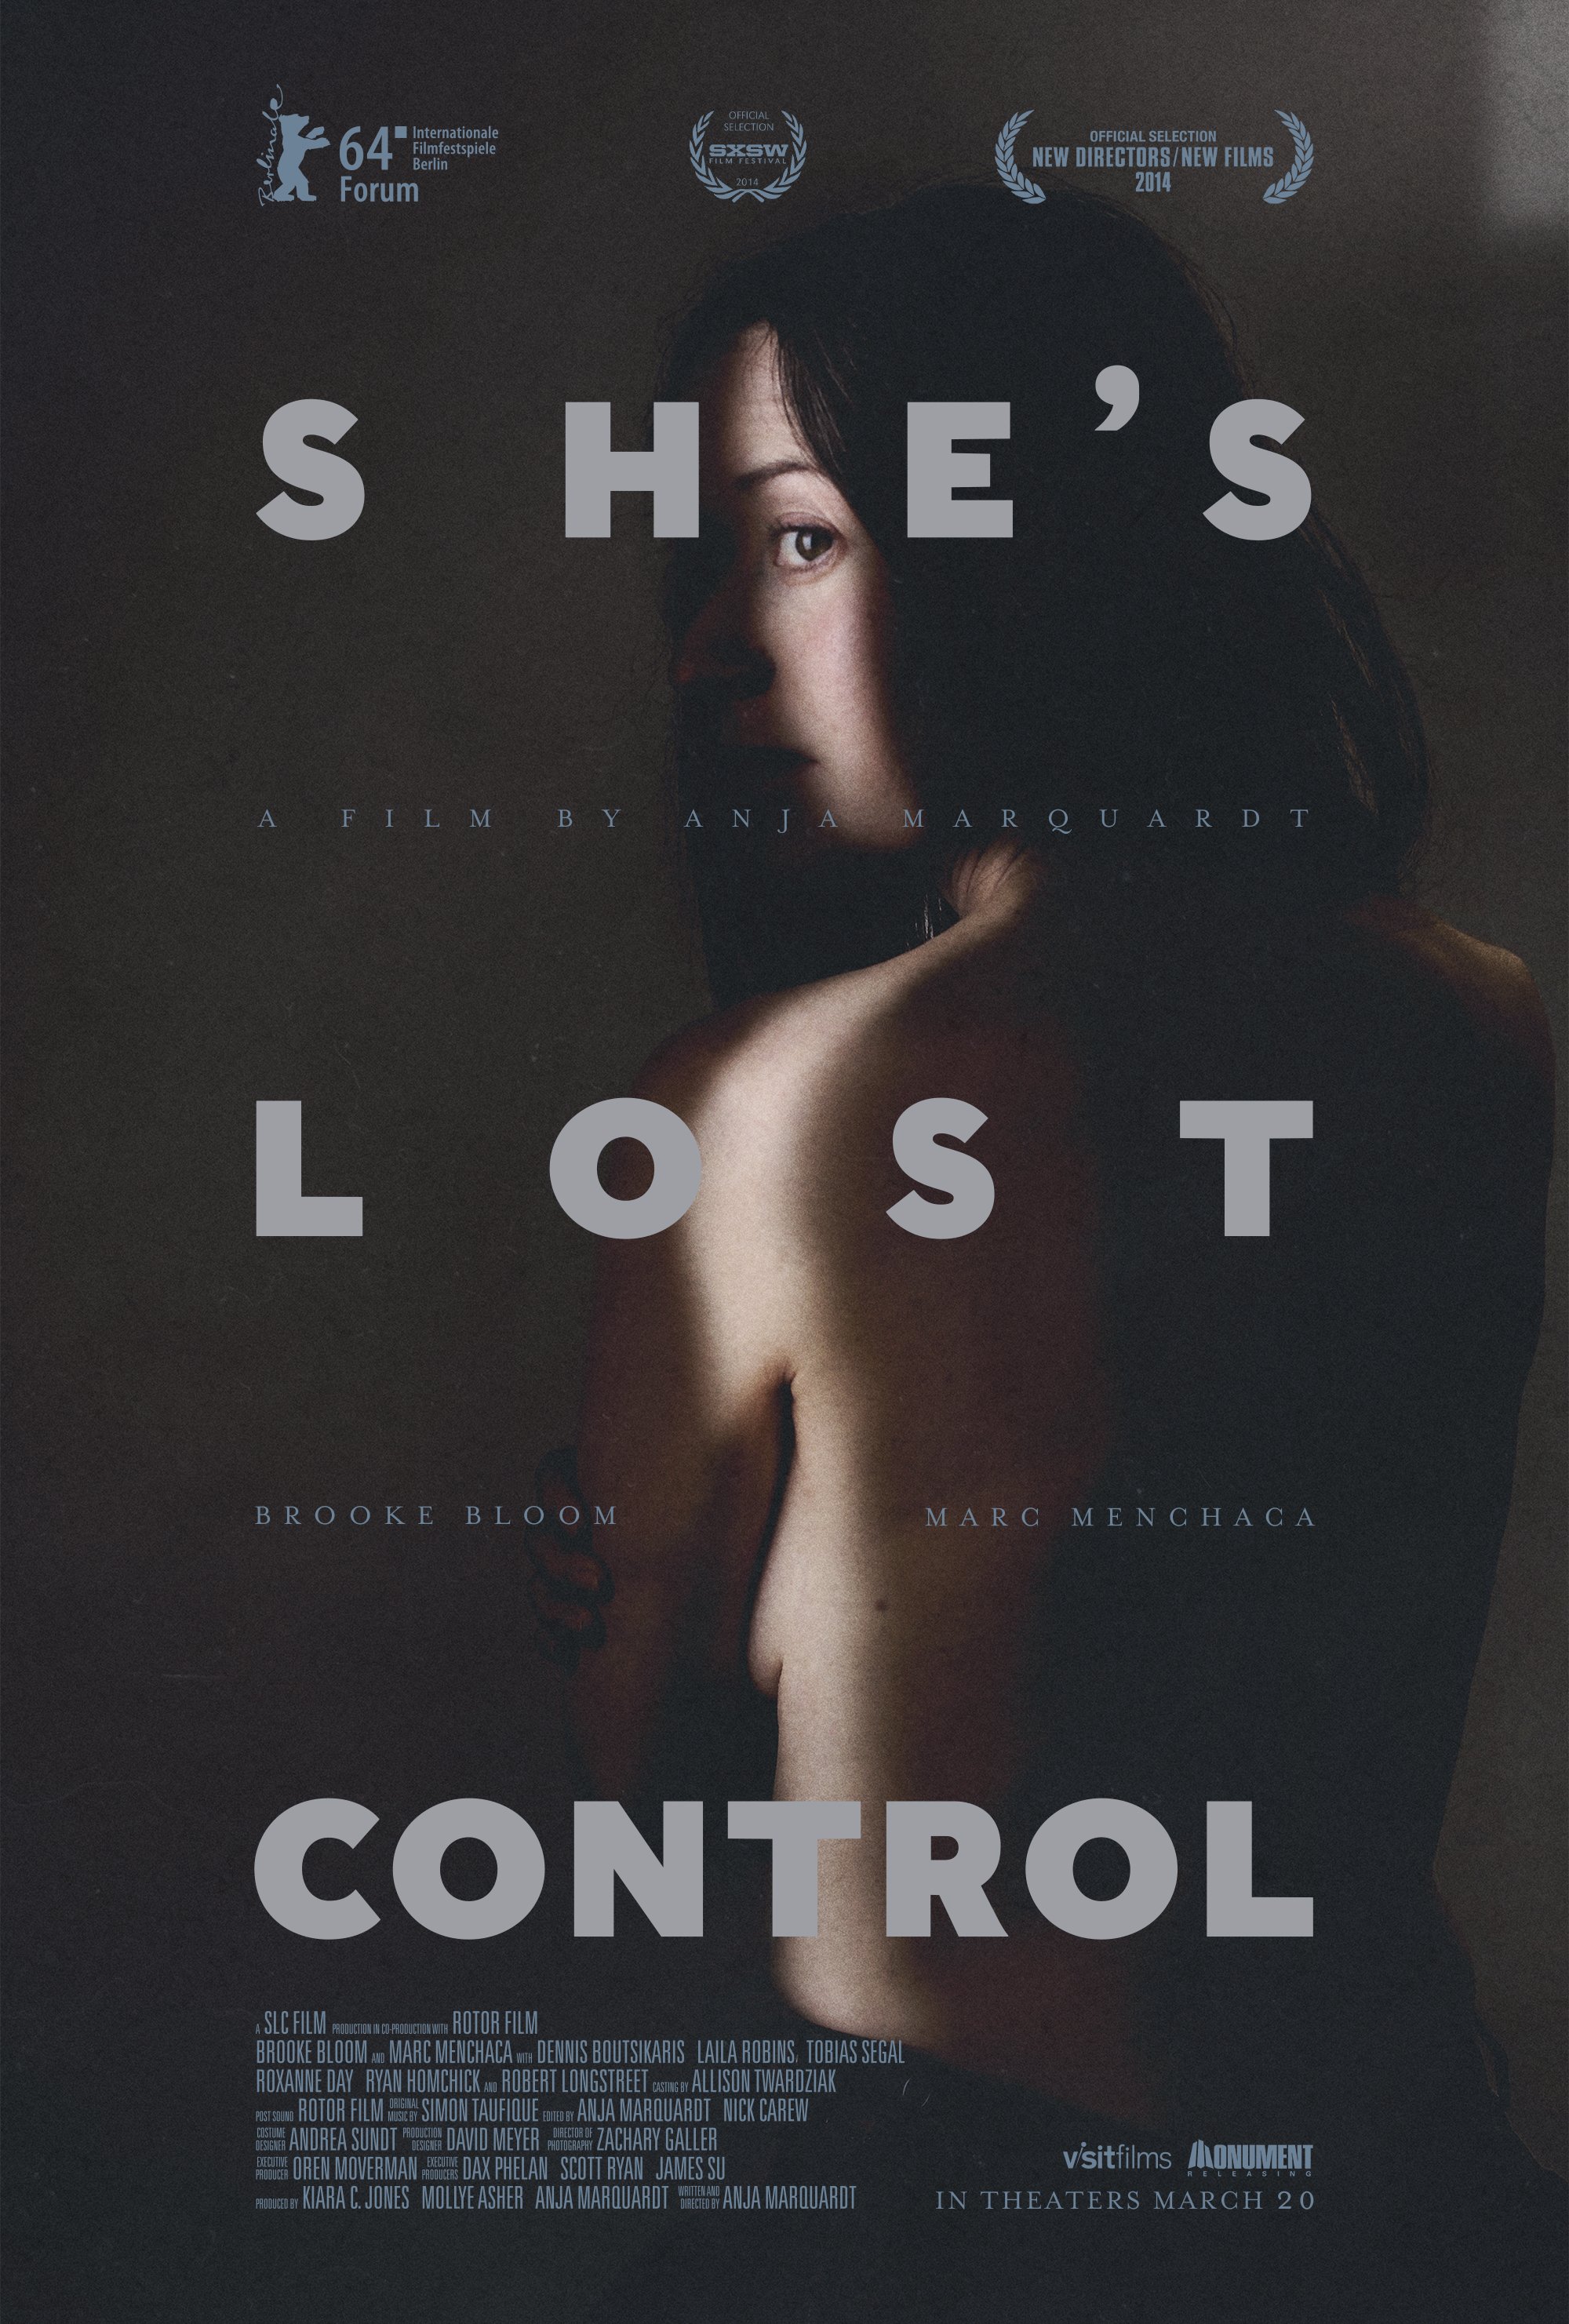 Poster of the movie She's Lost Control